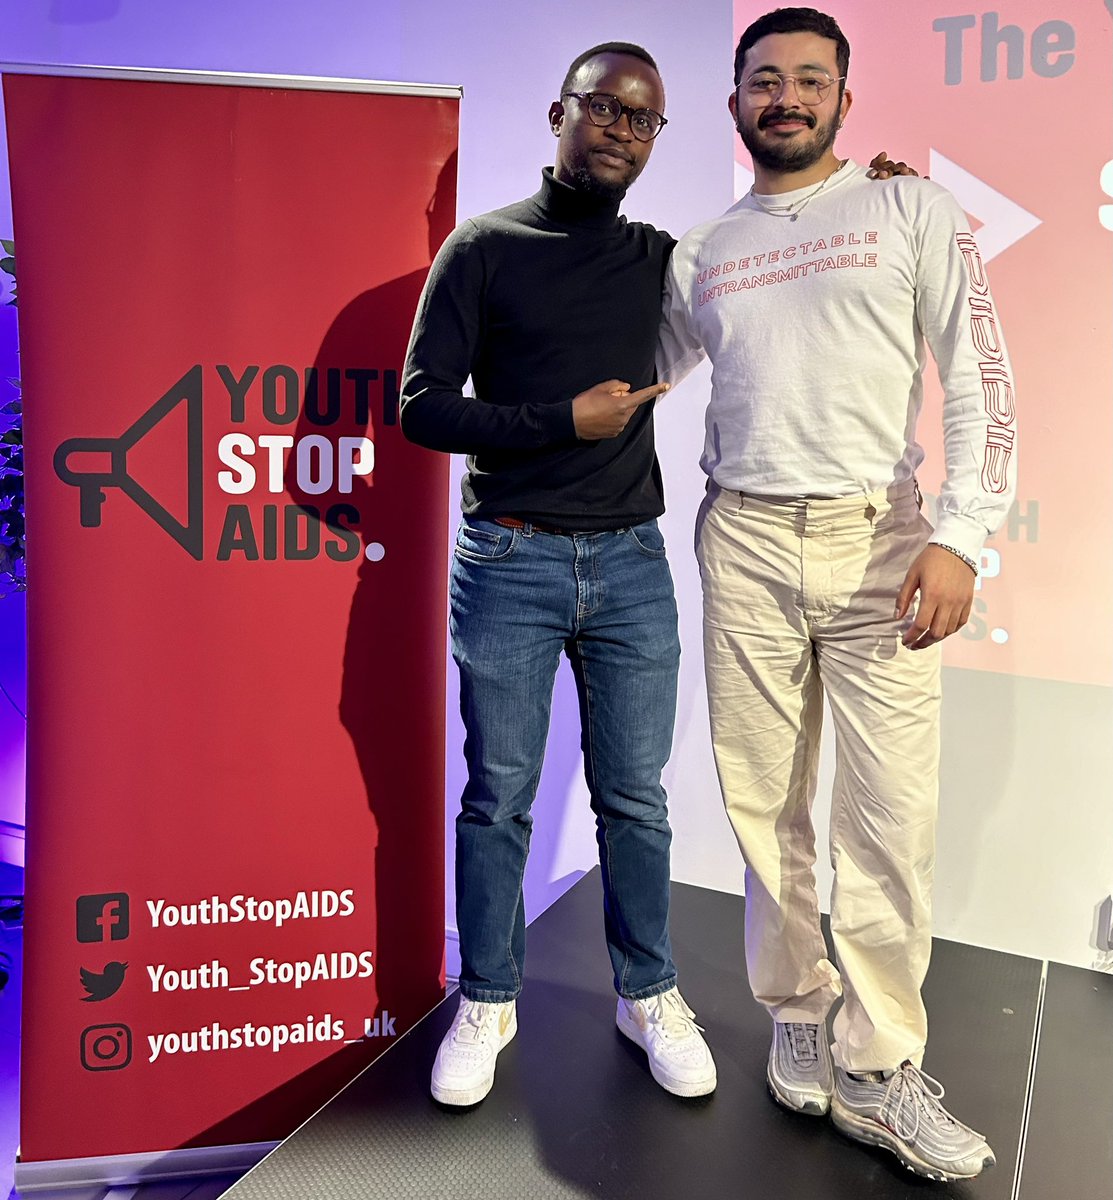 Great to be back @YouthStopAIDS Speaker Tour, listening to inspiring speakers sharing their empowering stories in the fight against #HIV & AIDS. Let's amplify their voices & shift power to save lives 👉🏾 bit.ly/savelivesrcf #YouthStopAIDS #StopAIDS #ShiftingPowerToSaveLives